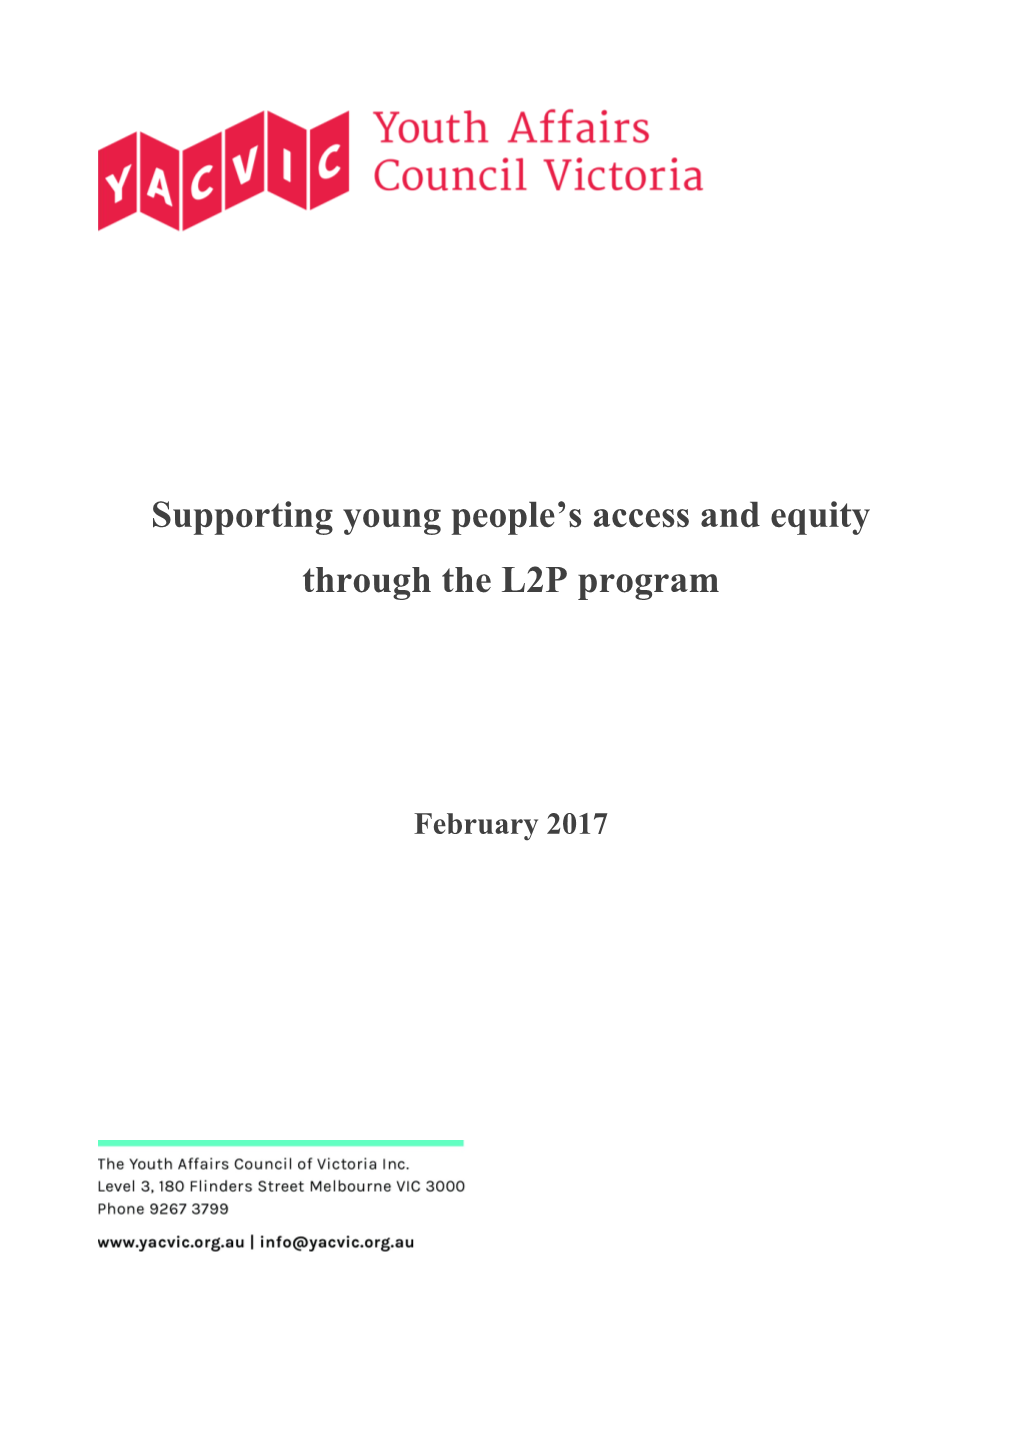 Supporting Young People S Access and Equity Through the L2P Program